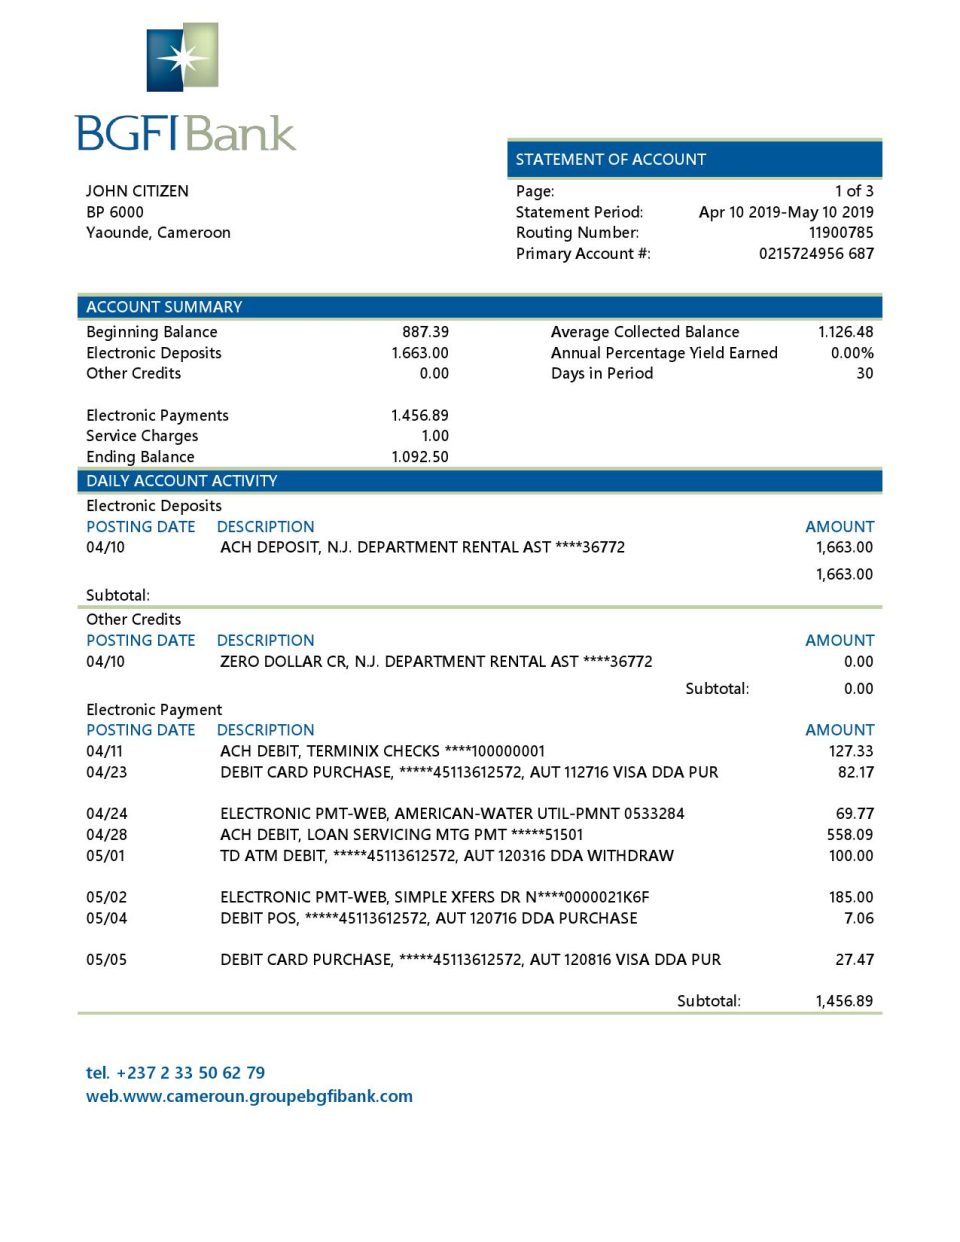 Cameroon BGFI Bank statement template in Word and PDF format